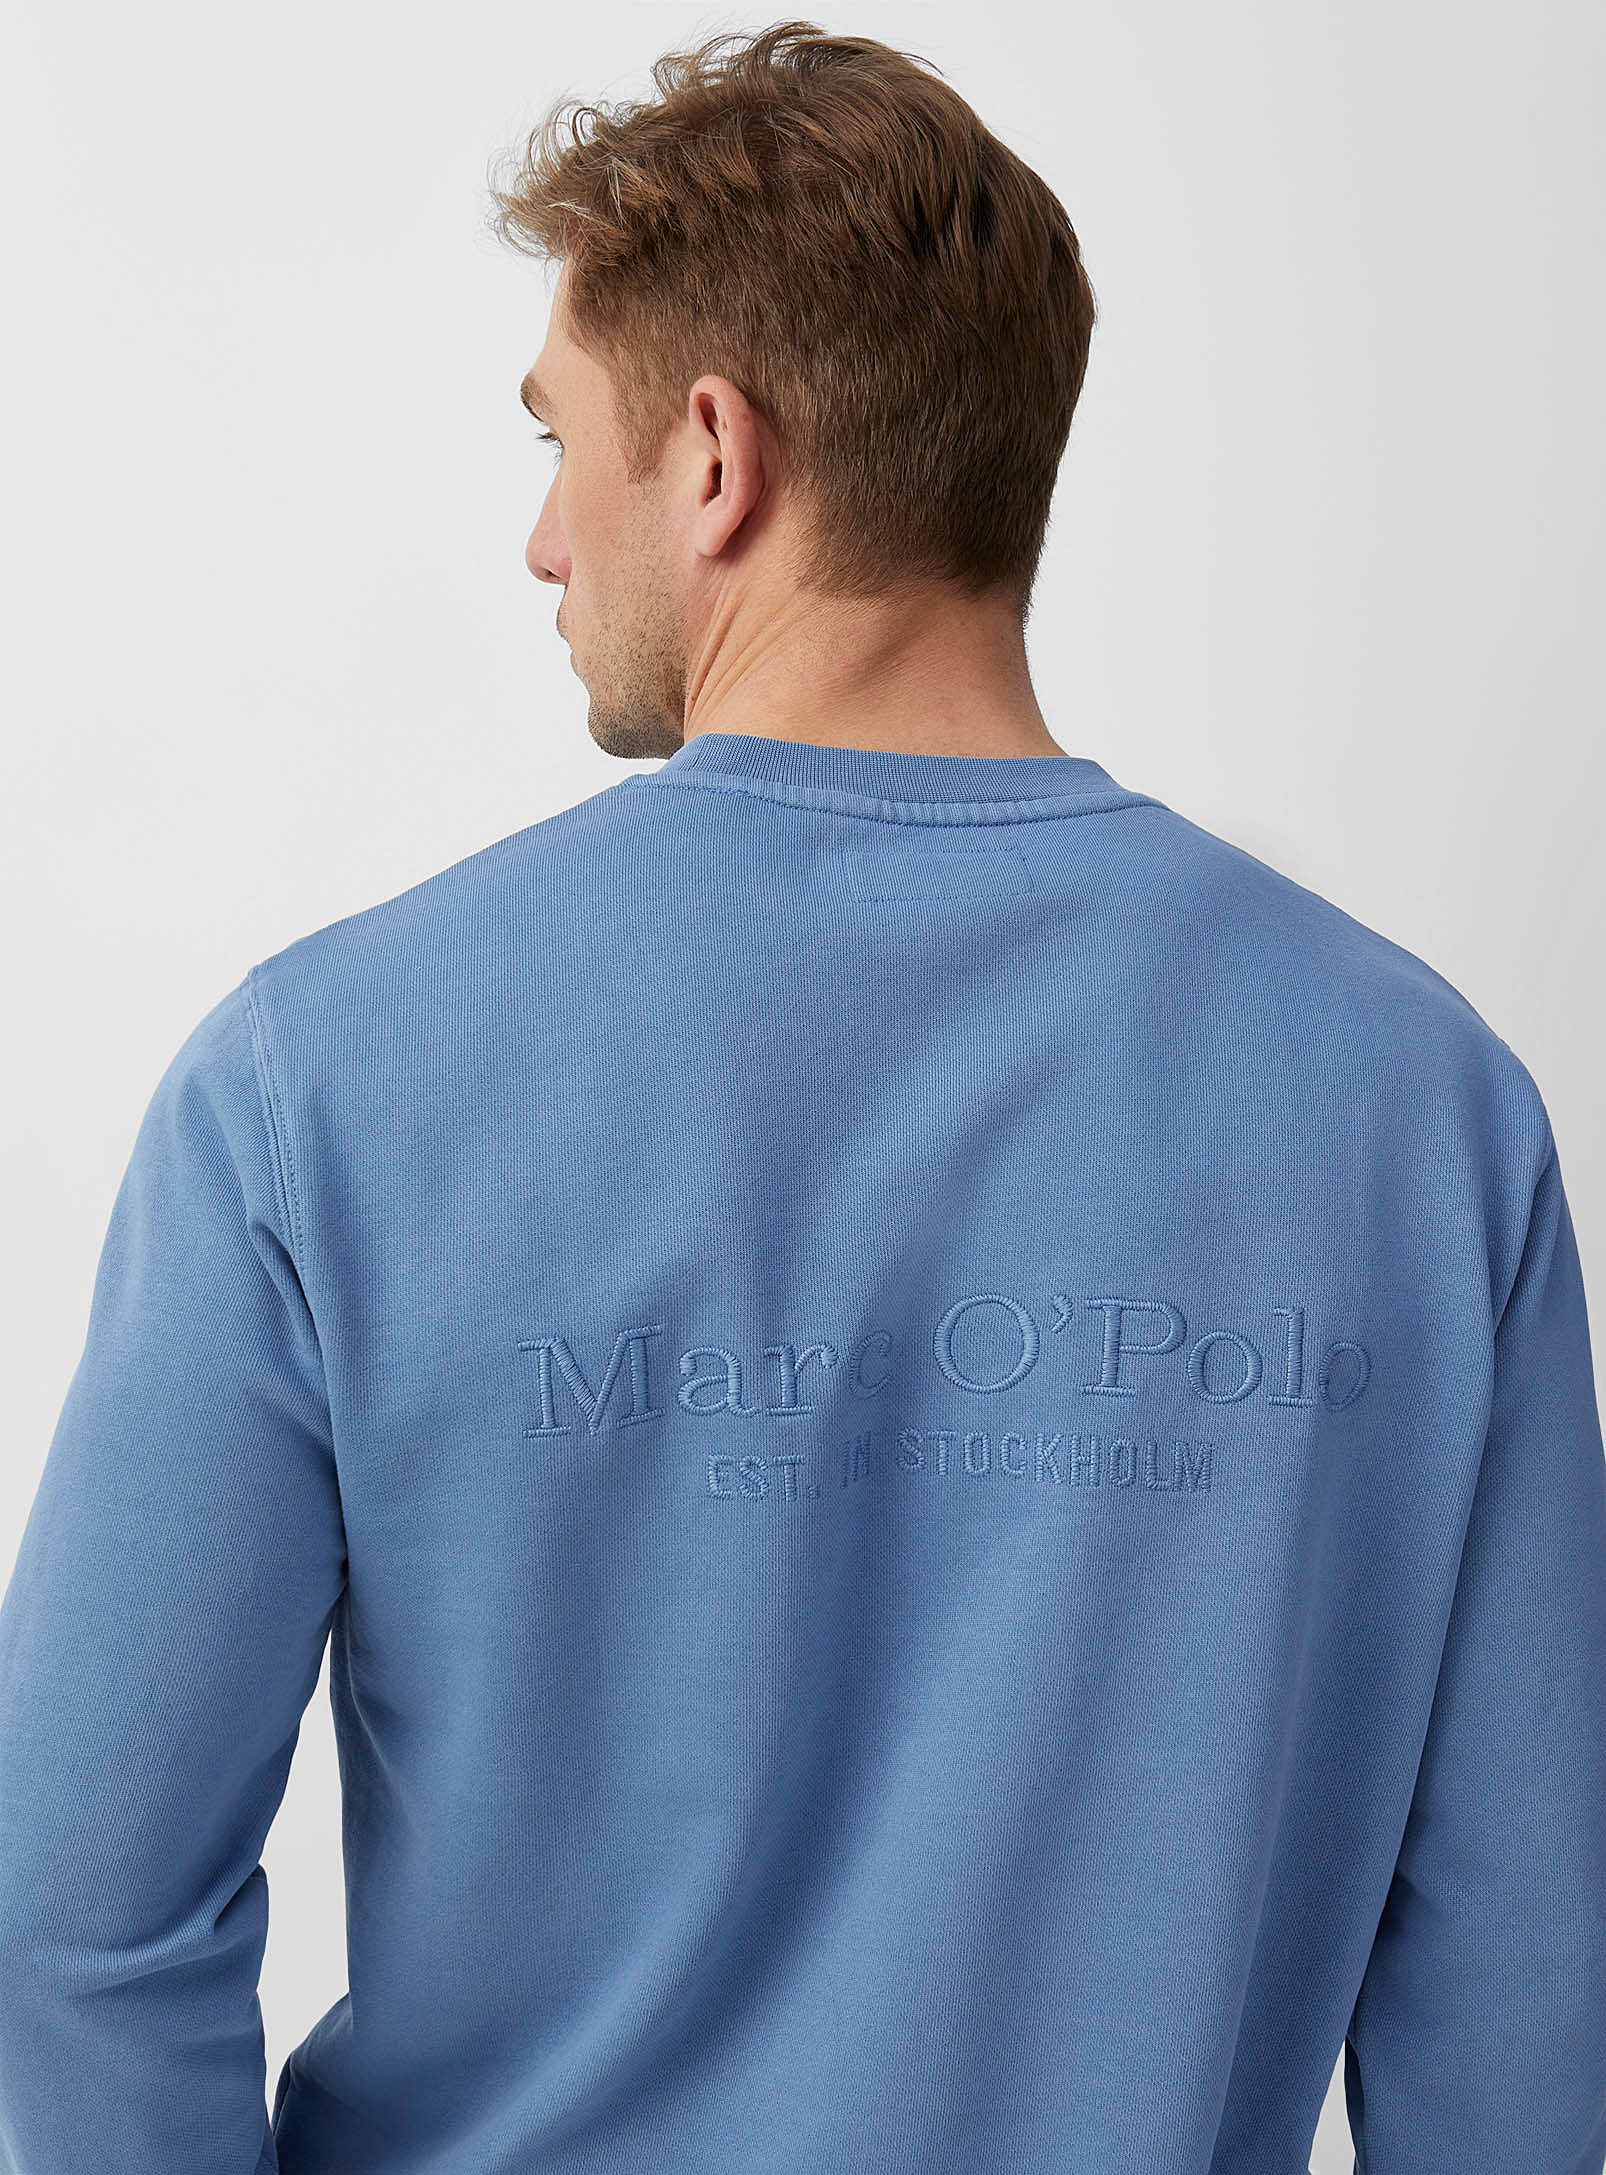 Marc O'polo Embroidered Logo Sweatshirt In Blue